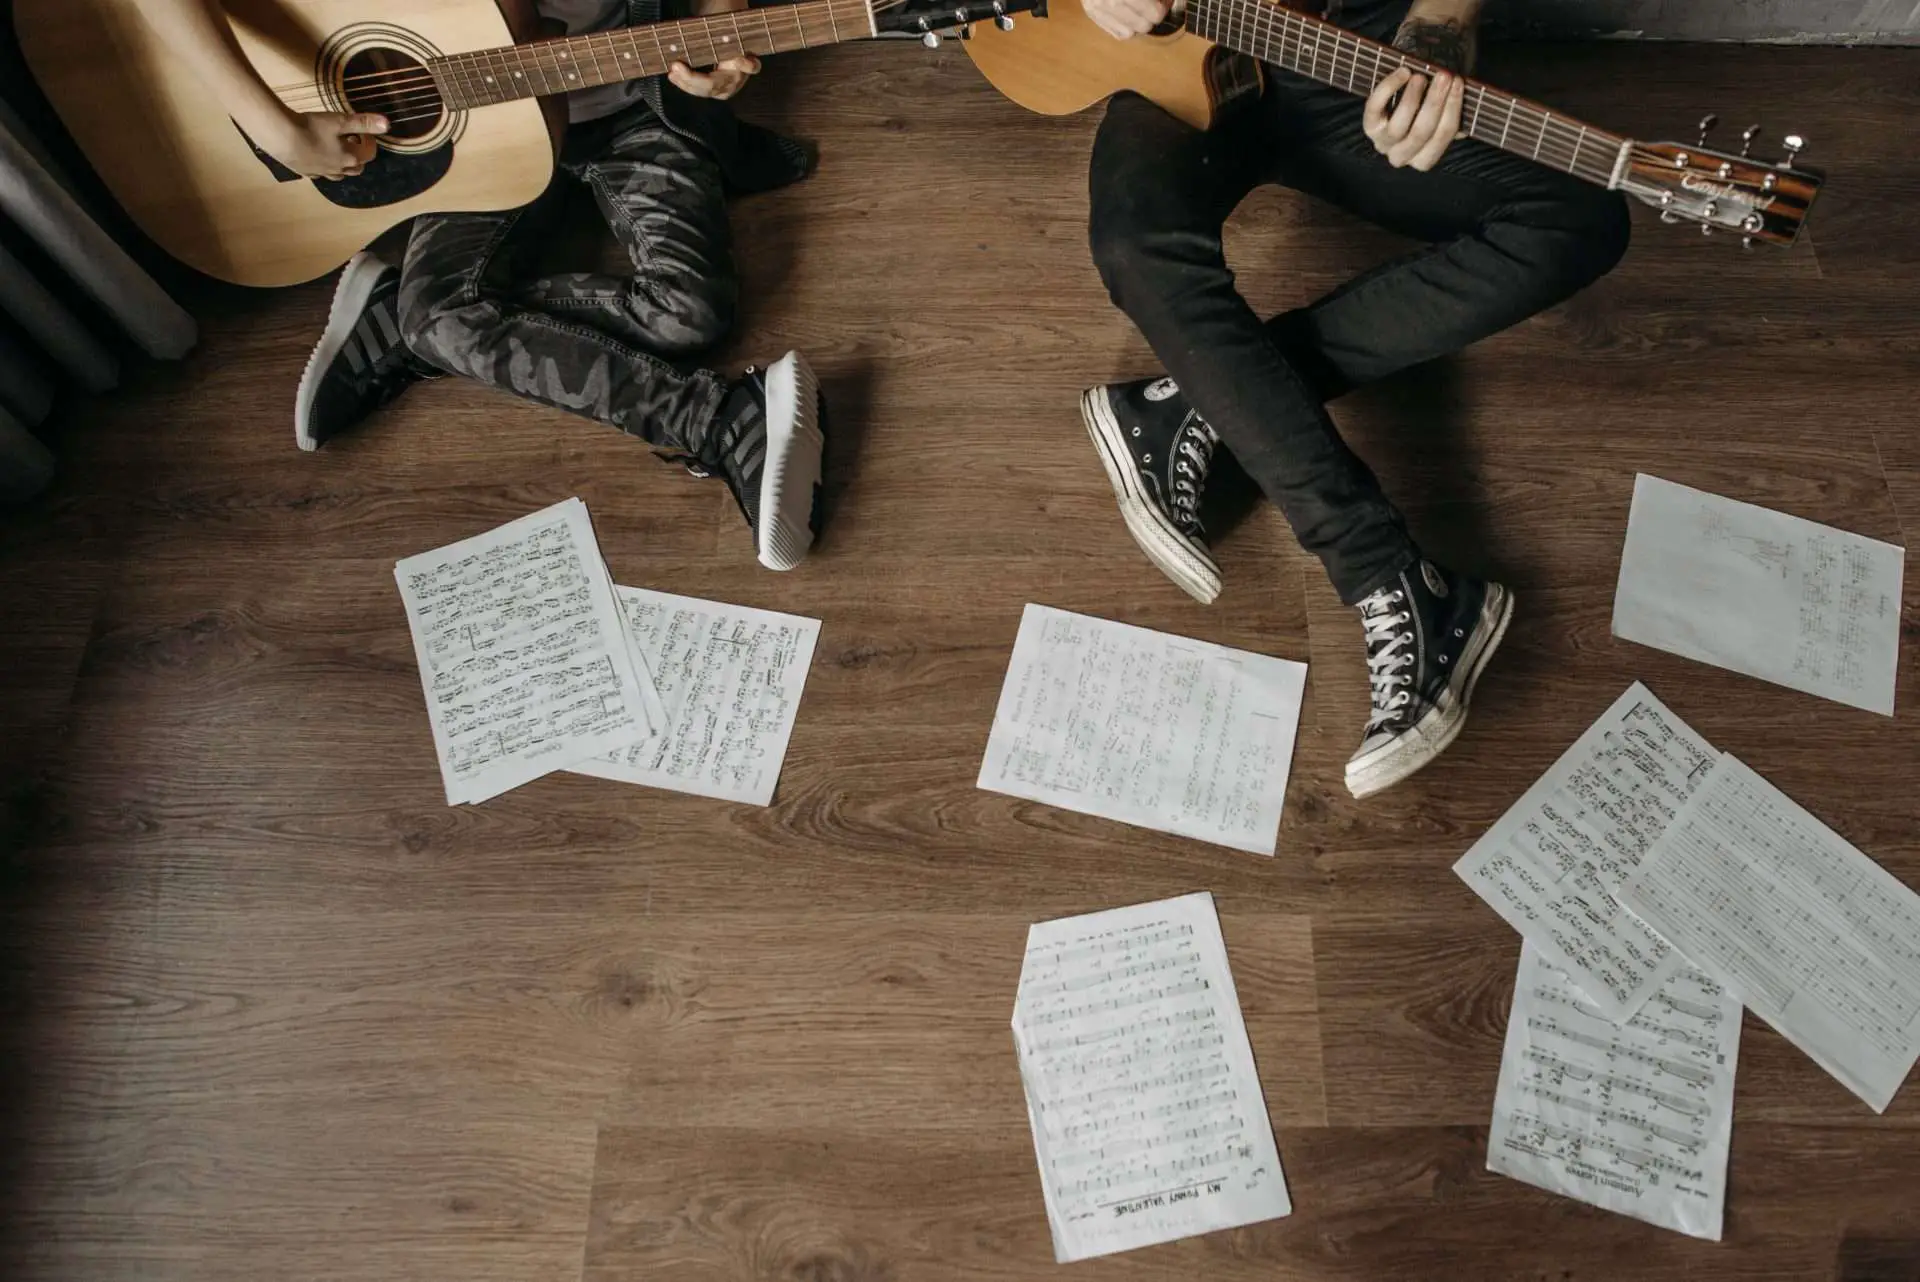 2 guitar players sitting on floor with sheet music surrounding them